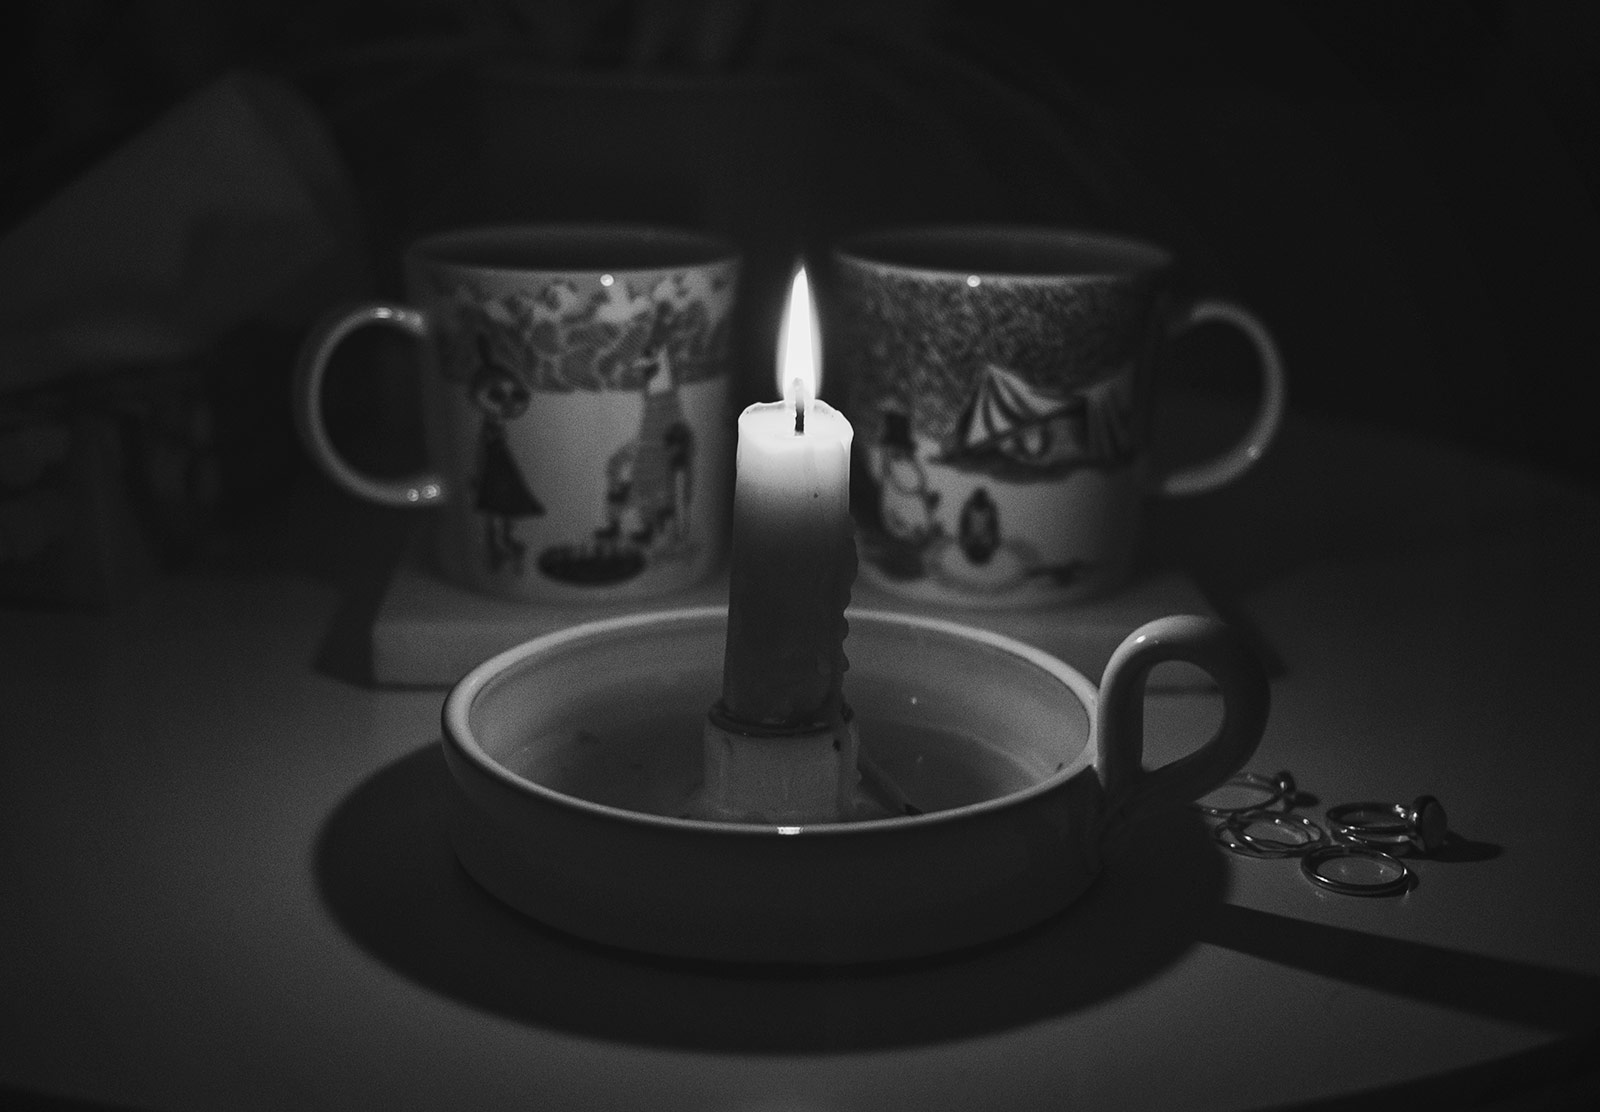 Candle in front of mugs